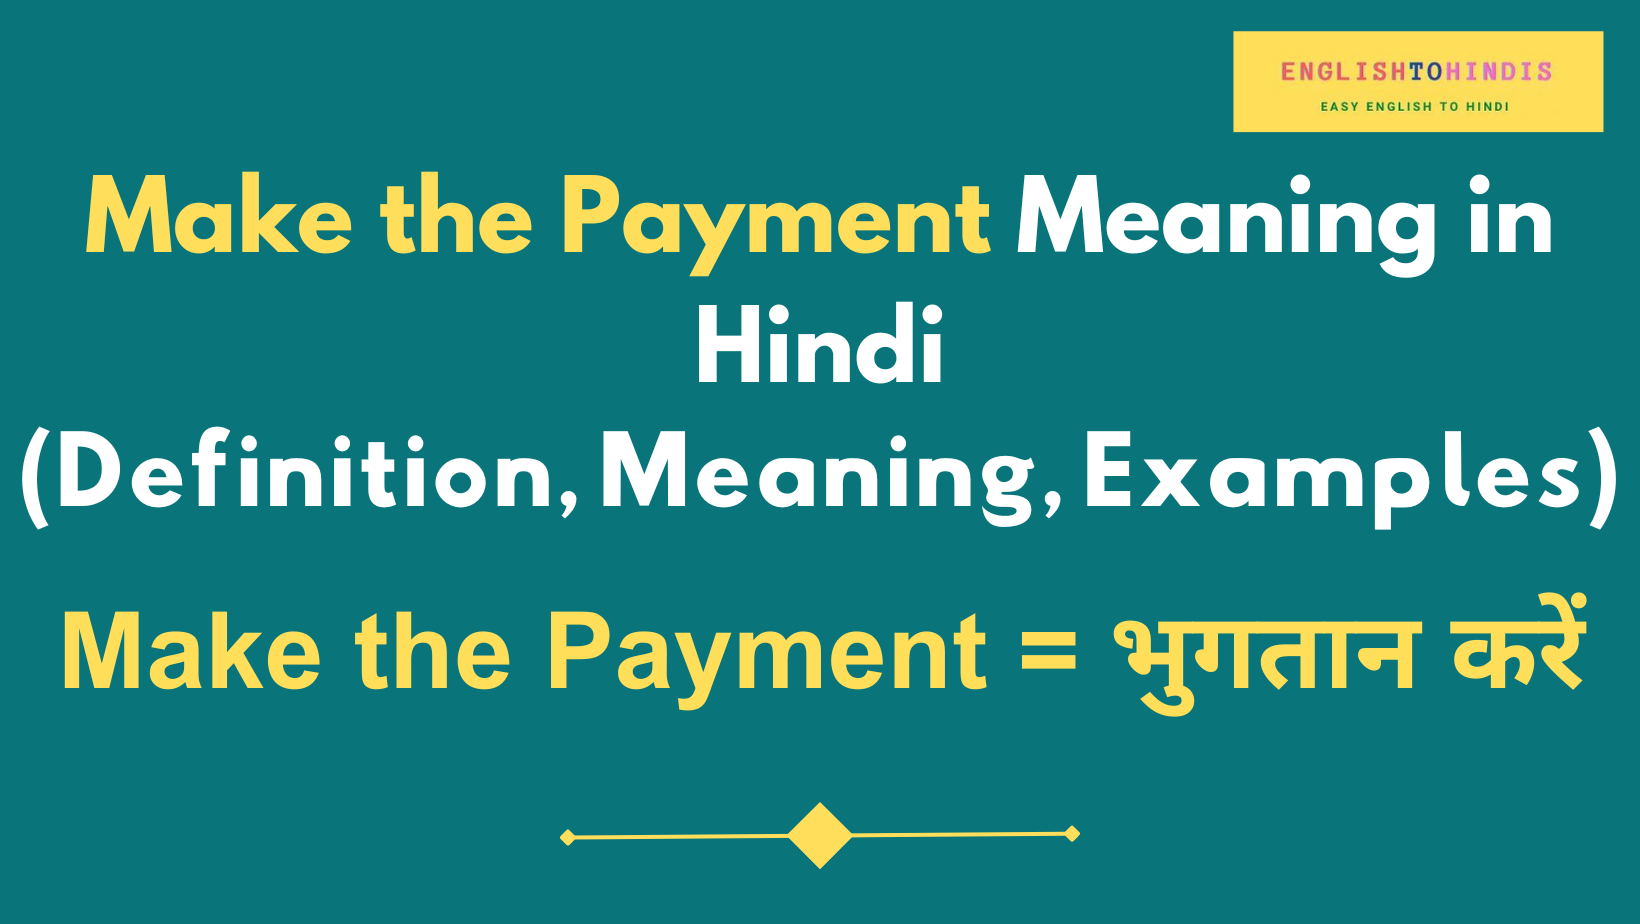 Make the Payment Meaning in Hindi